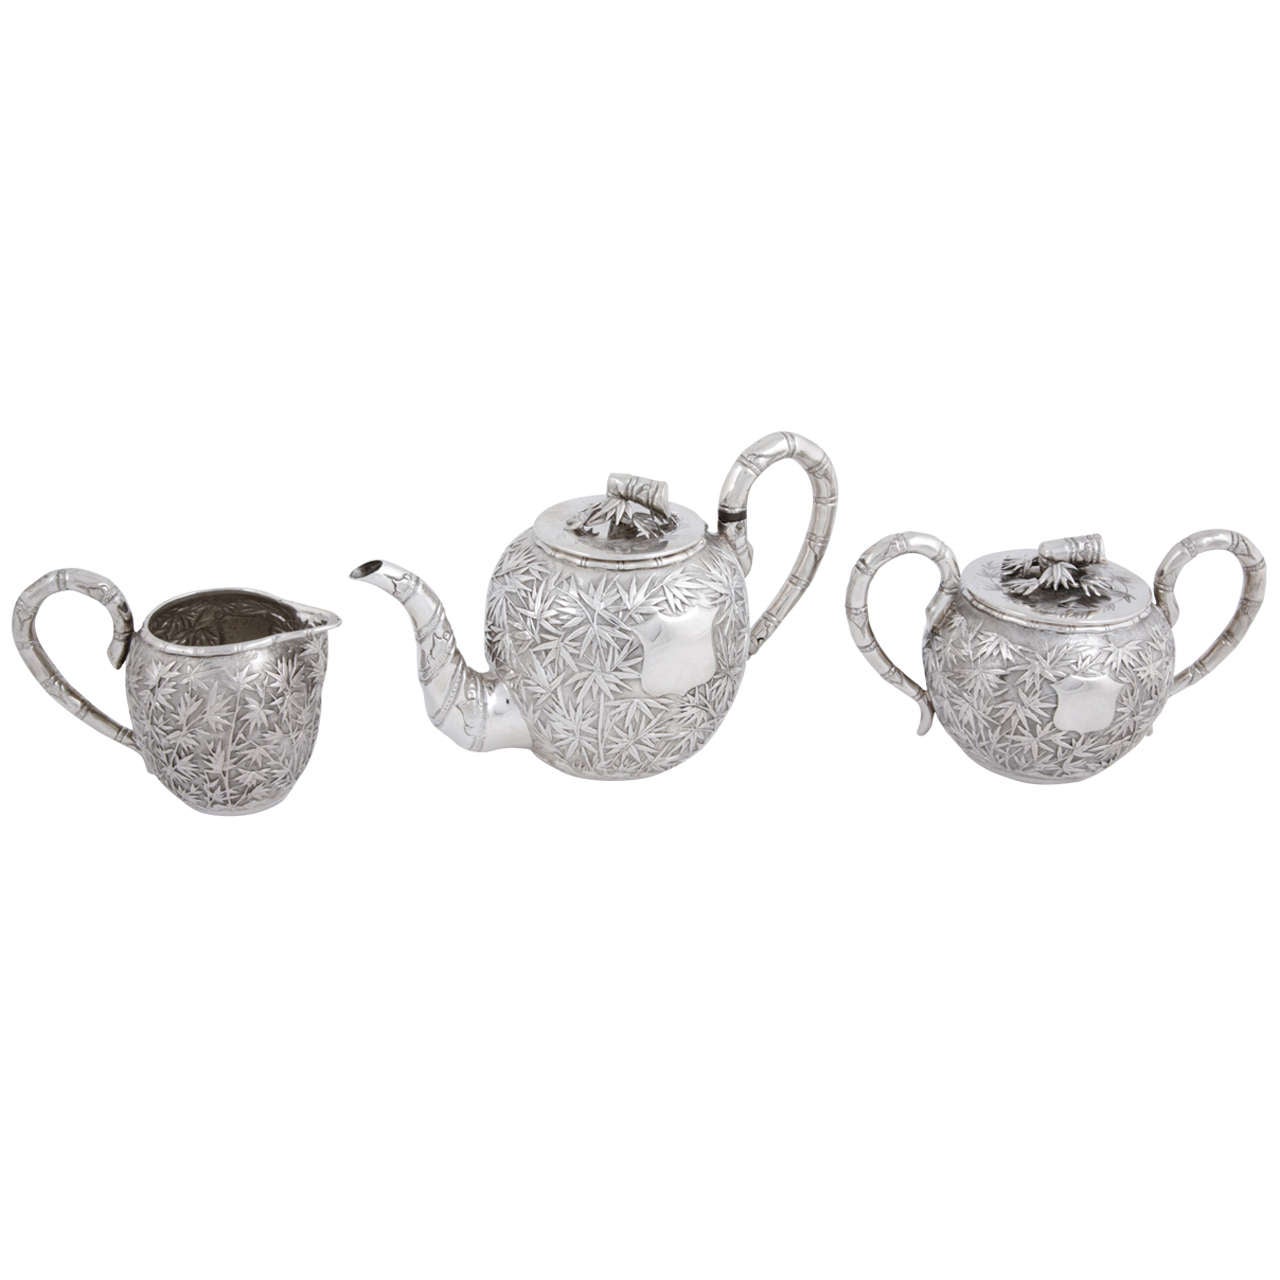 Chinese Export Silver Tea Set